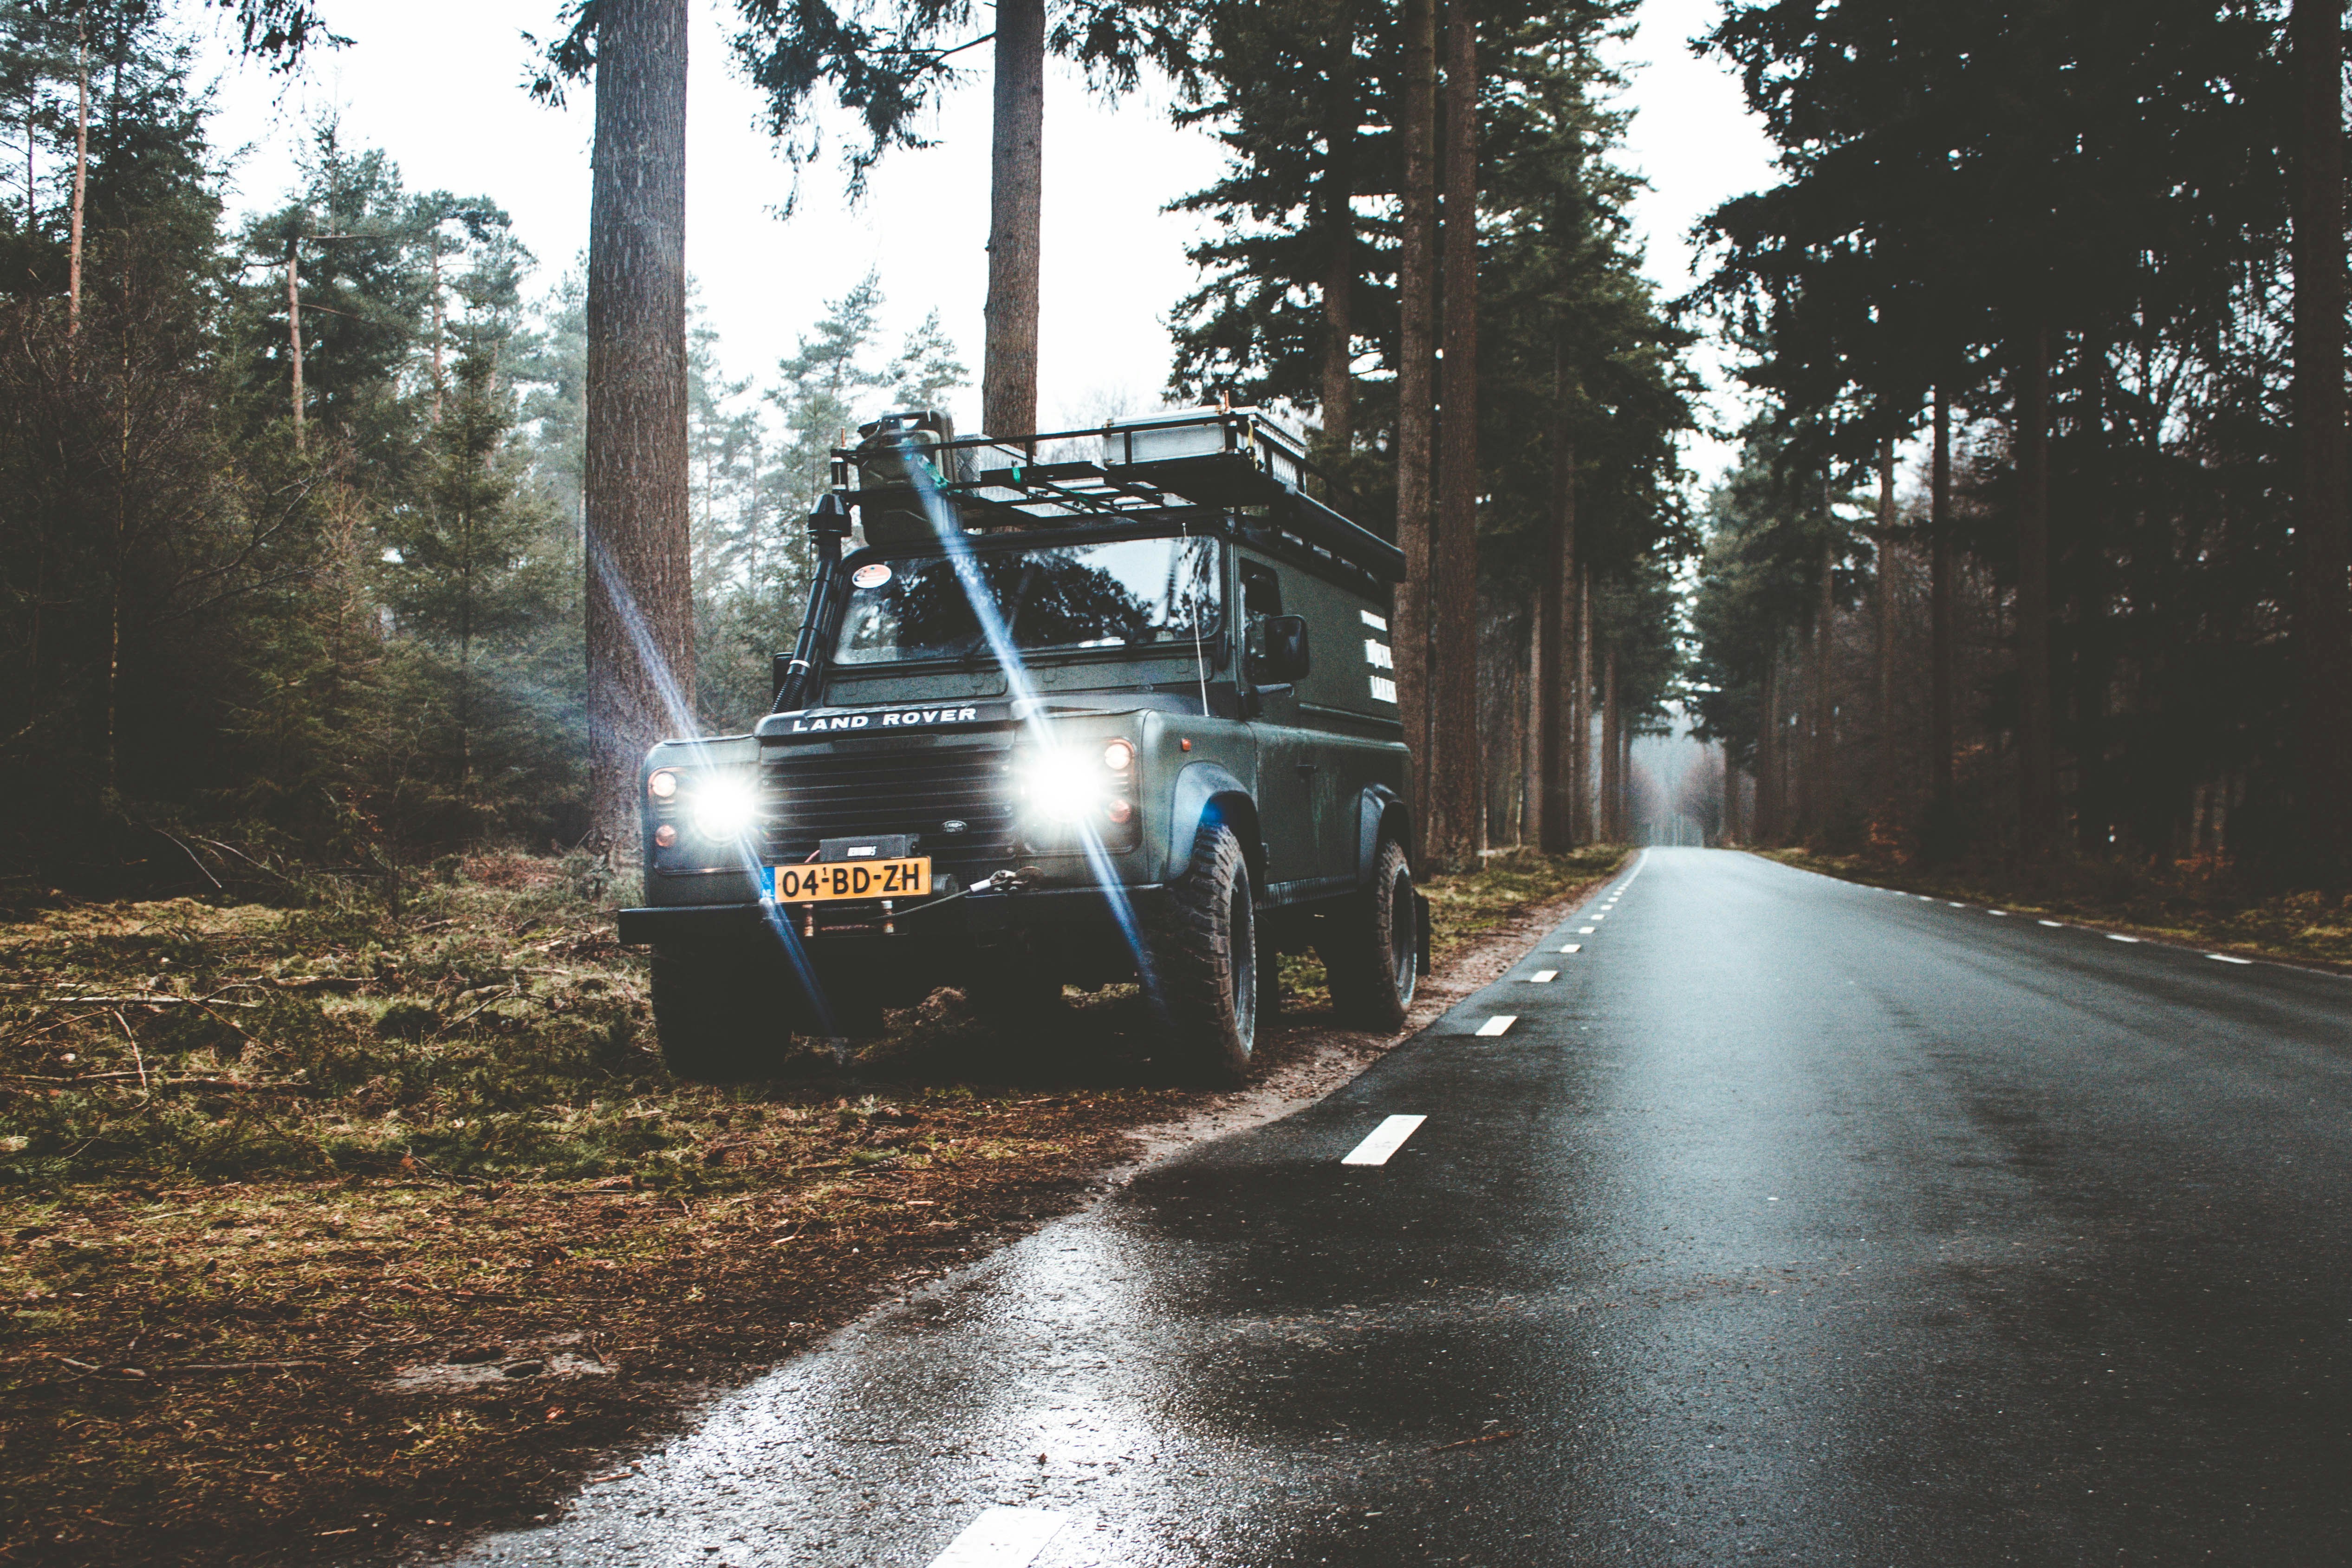 A wild defender on the endless forest road. I loving this color so much it match with the colors of the forest.